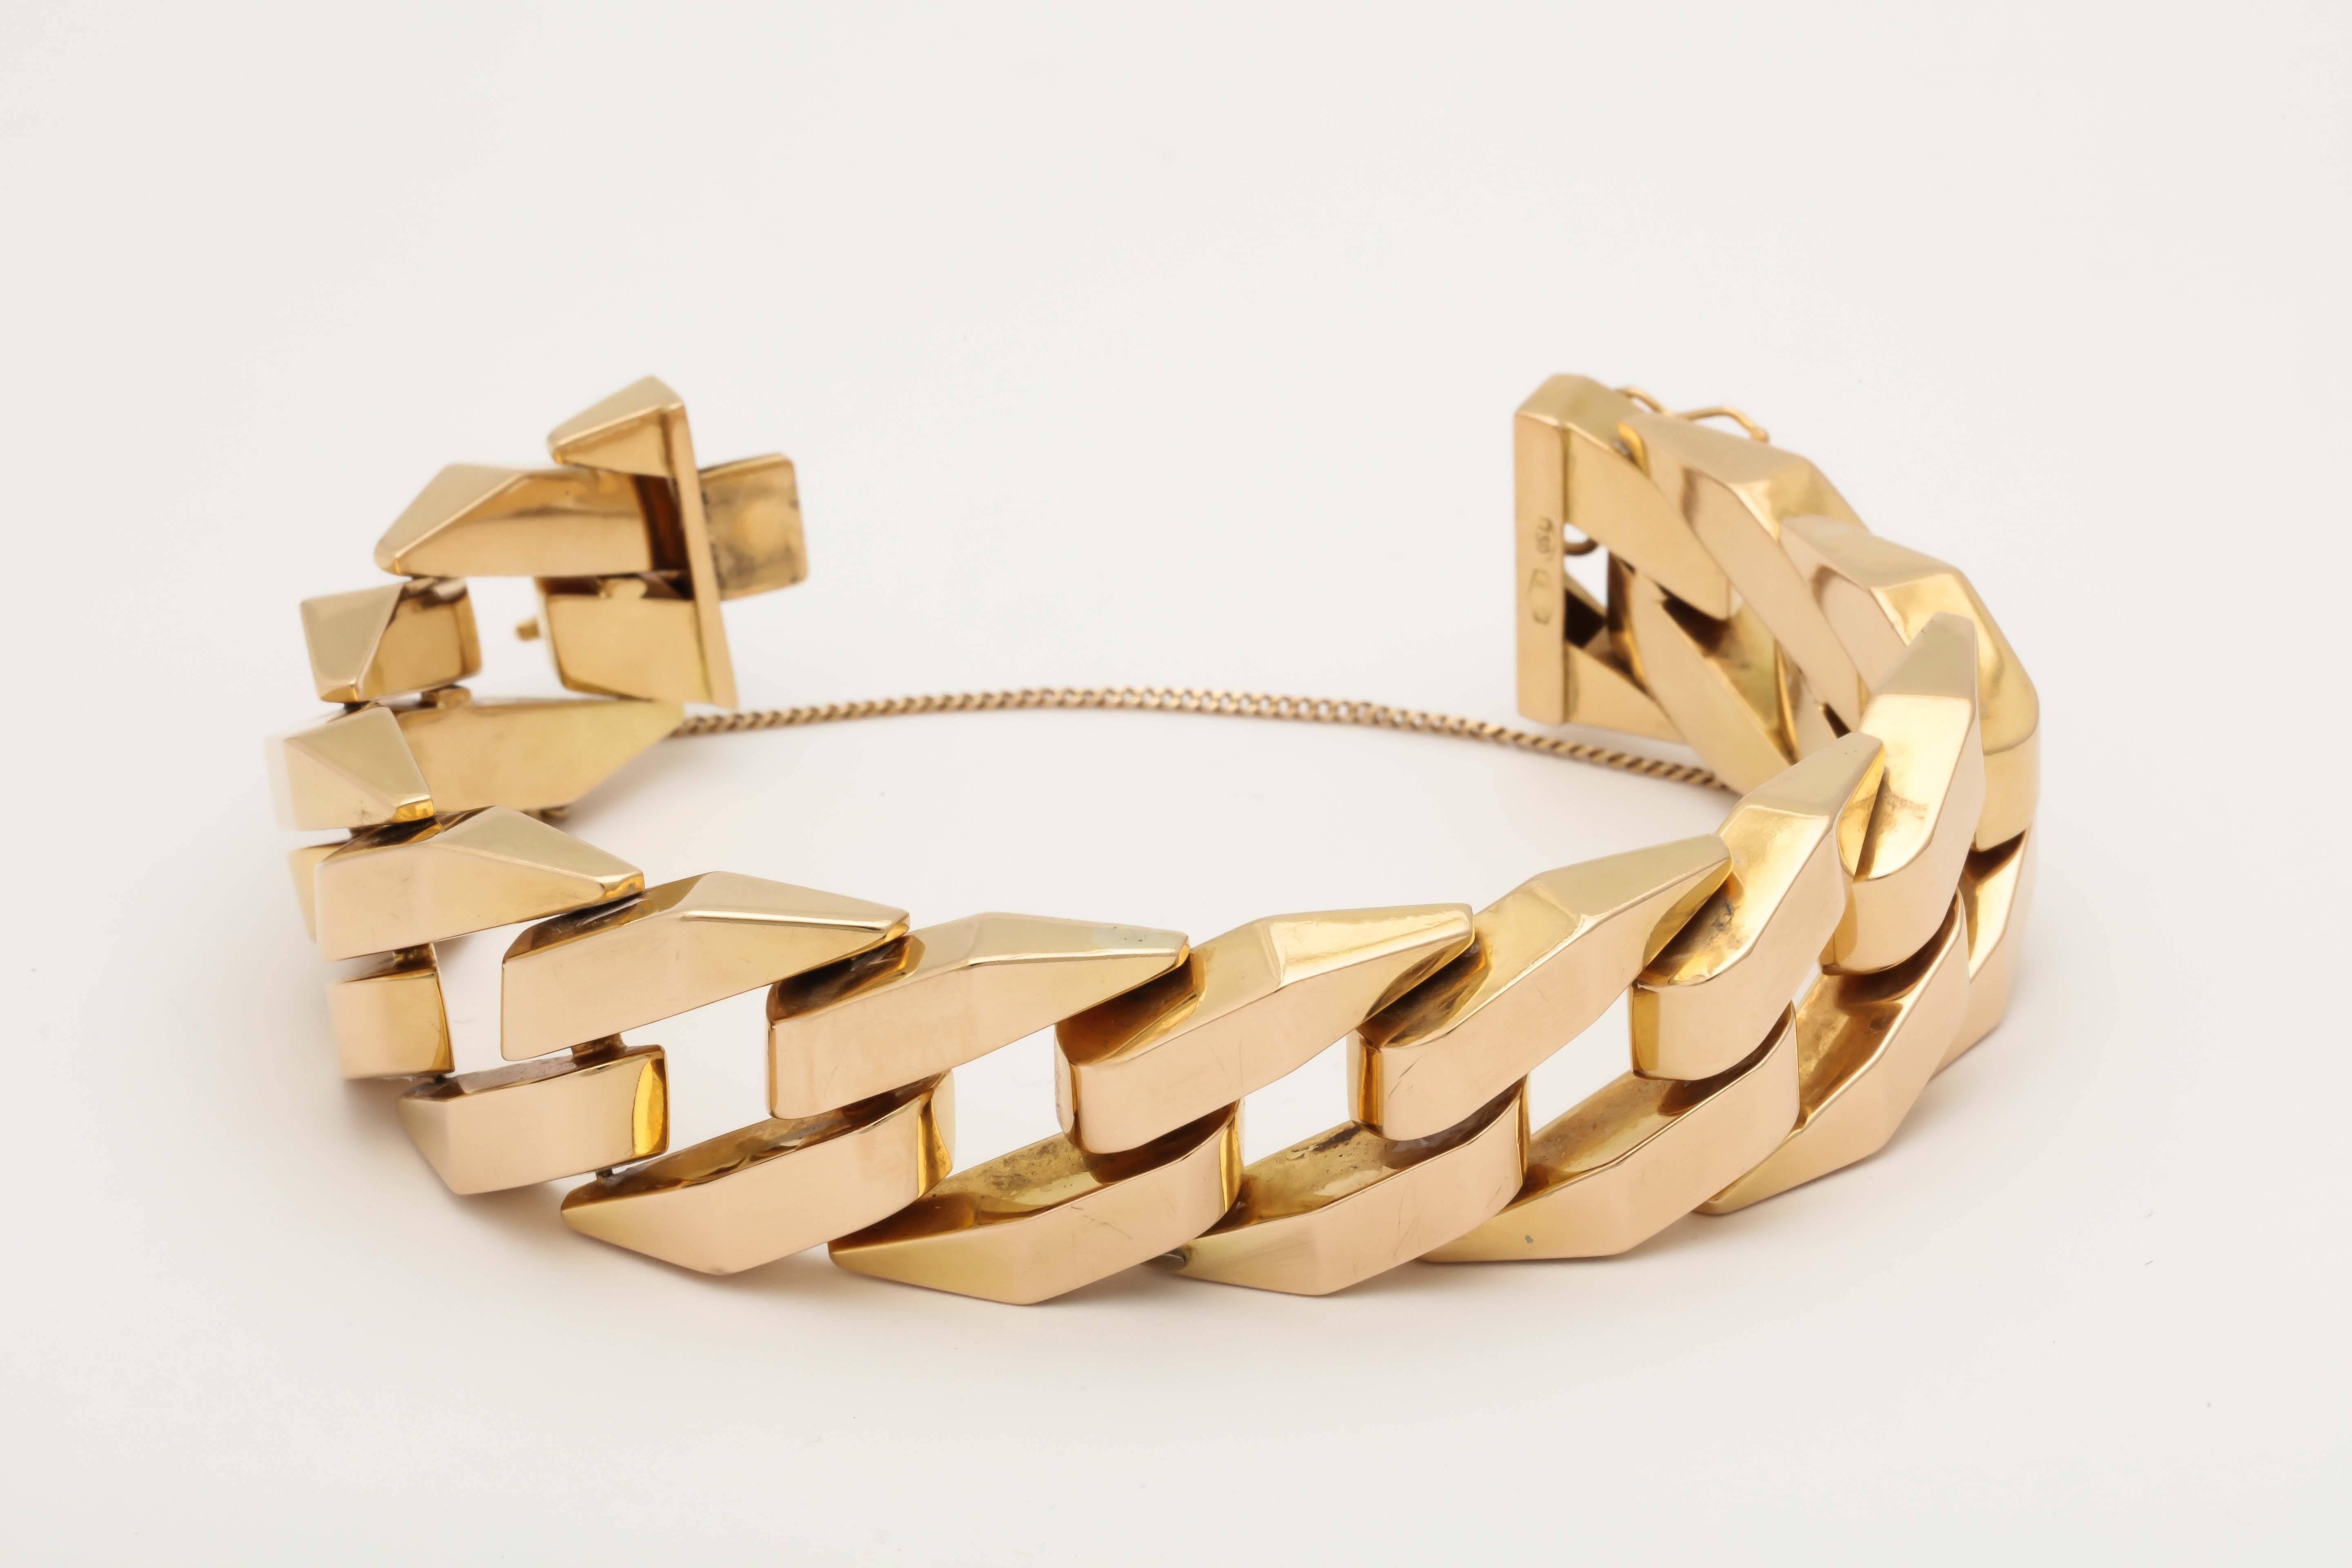 18kt Gold High Polish Open Link Bracelet Consisting Of !2 interlocking Jagged Links Measuring 7 inches Long. Italian Made In The 1960's. Made With 2 Figure 8 Safety Mechanisms And One Safety Chain For Extra Security.